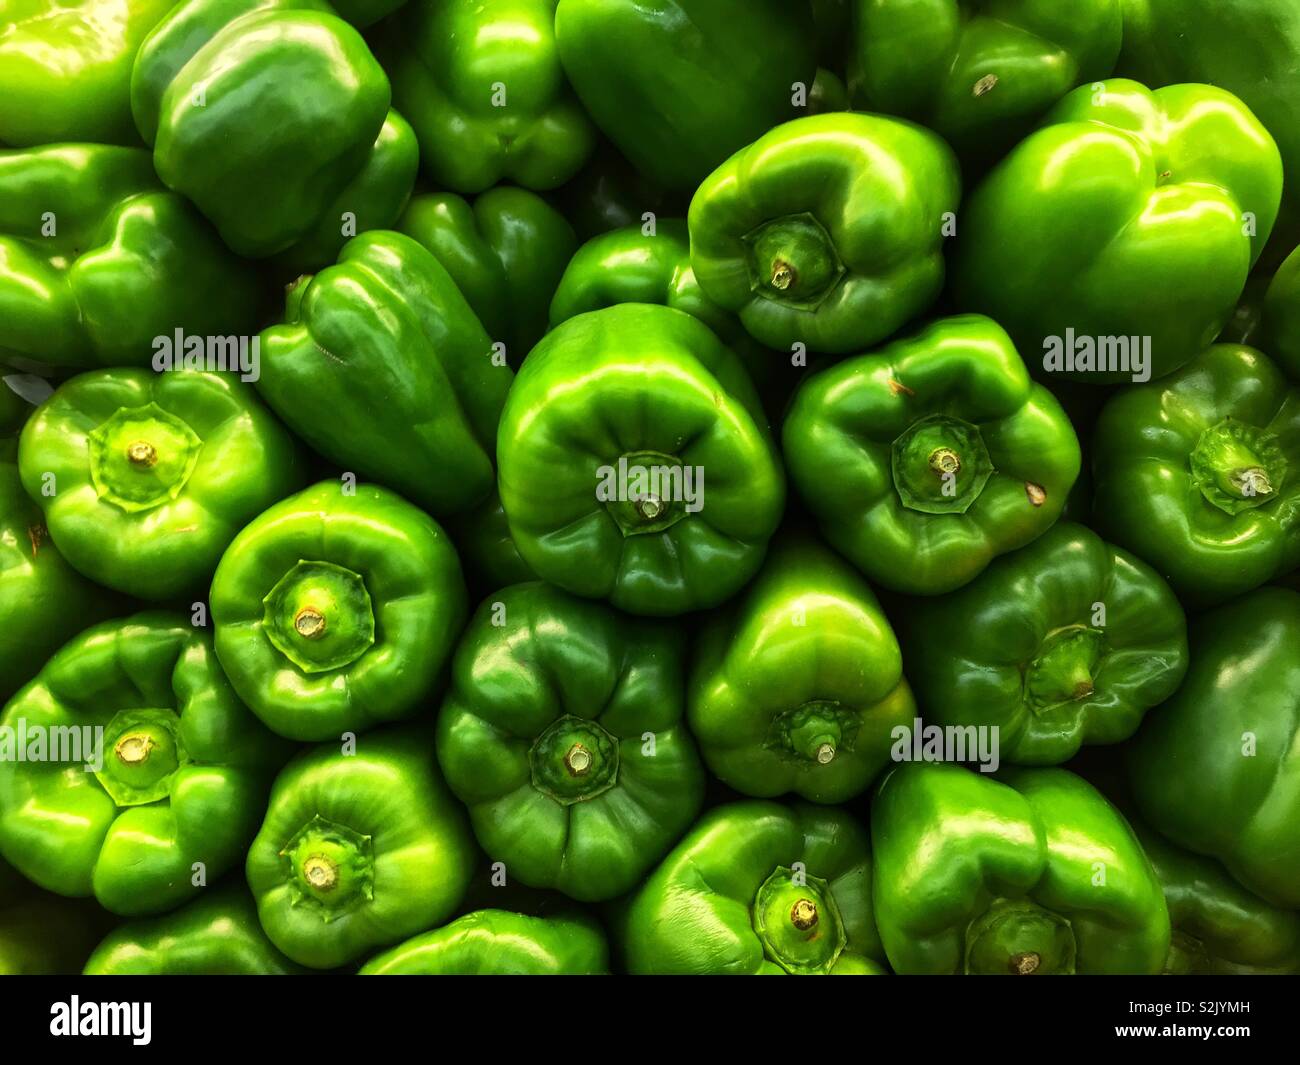 Delicious fresh green peppers piled high on display and for sale at the local produce vendor. Stock Photo